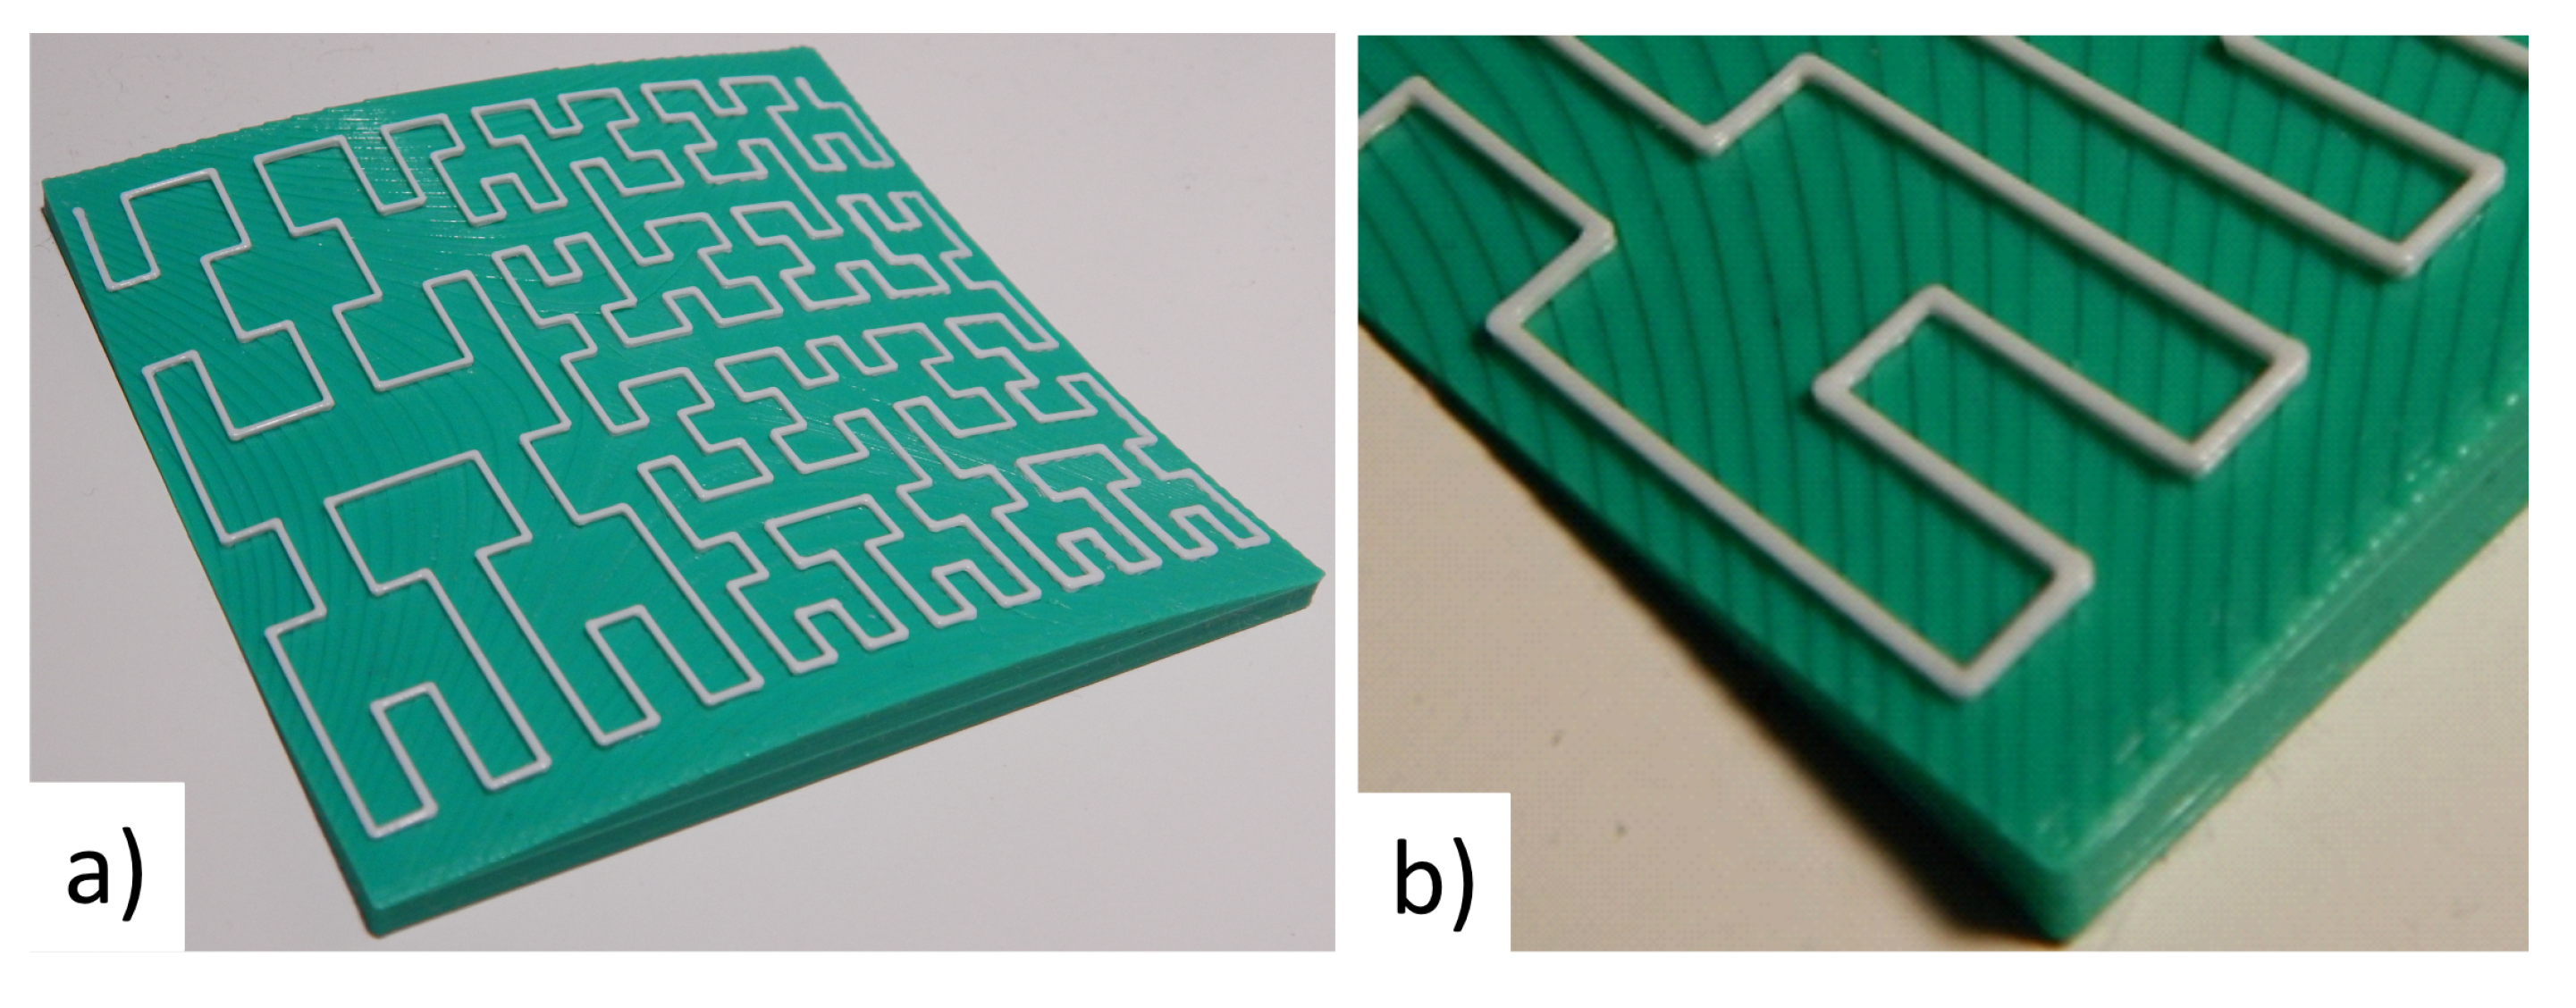 Arabiske Sarabo Sovesal Misforståelse Applied Sciences | Free Full-Text | Algorithm for the Conformal 3D Printing  on Non-Planar Tessellated Surfaces: Applicability in Patterns and Lattices